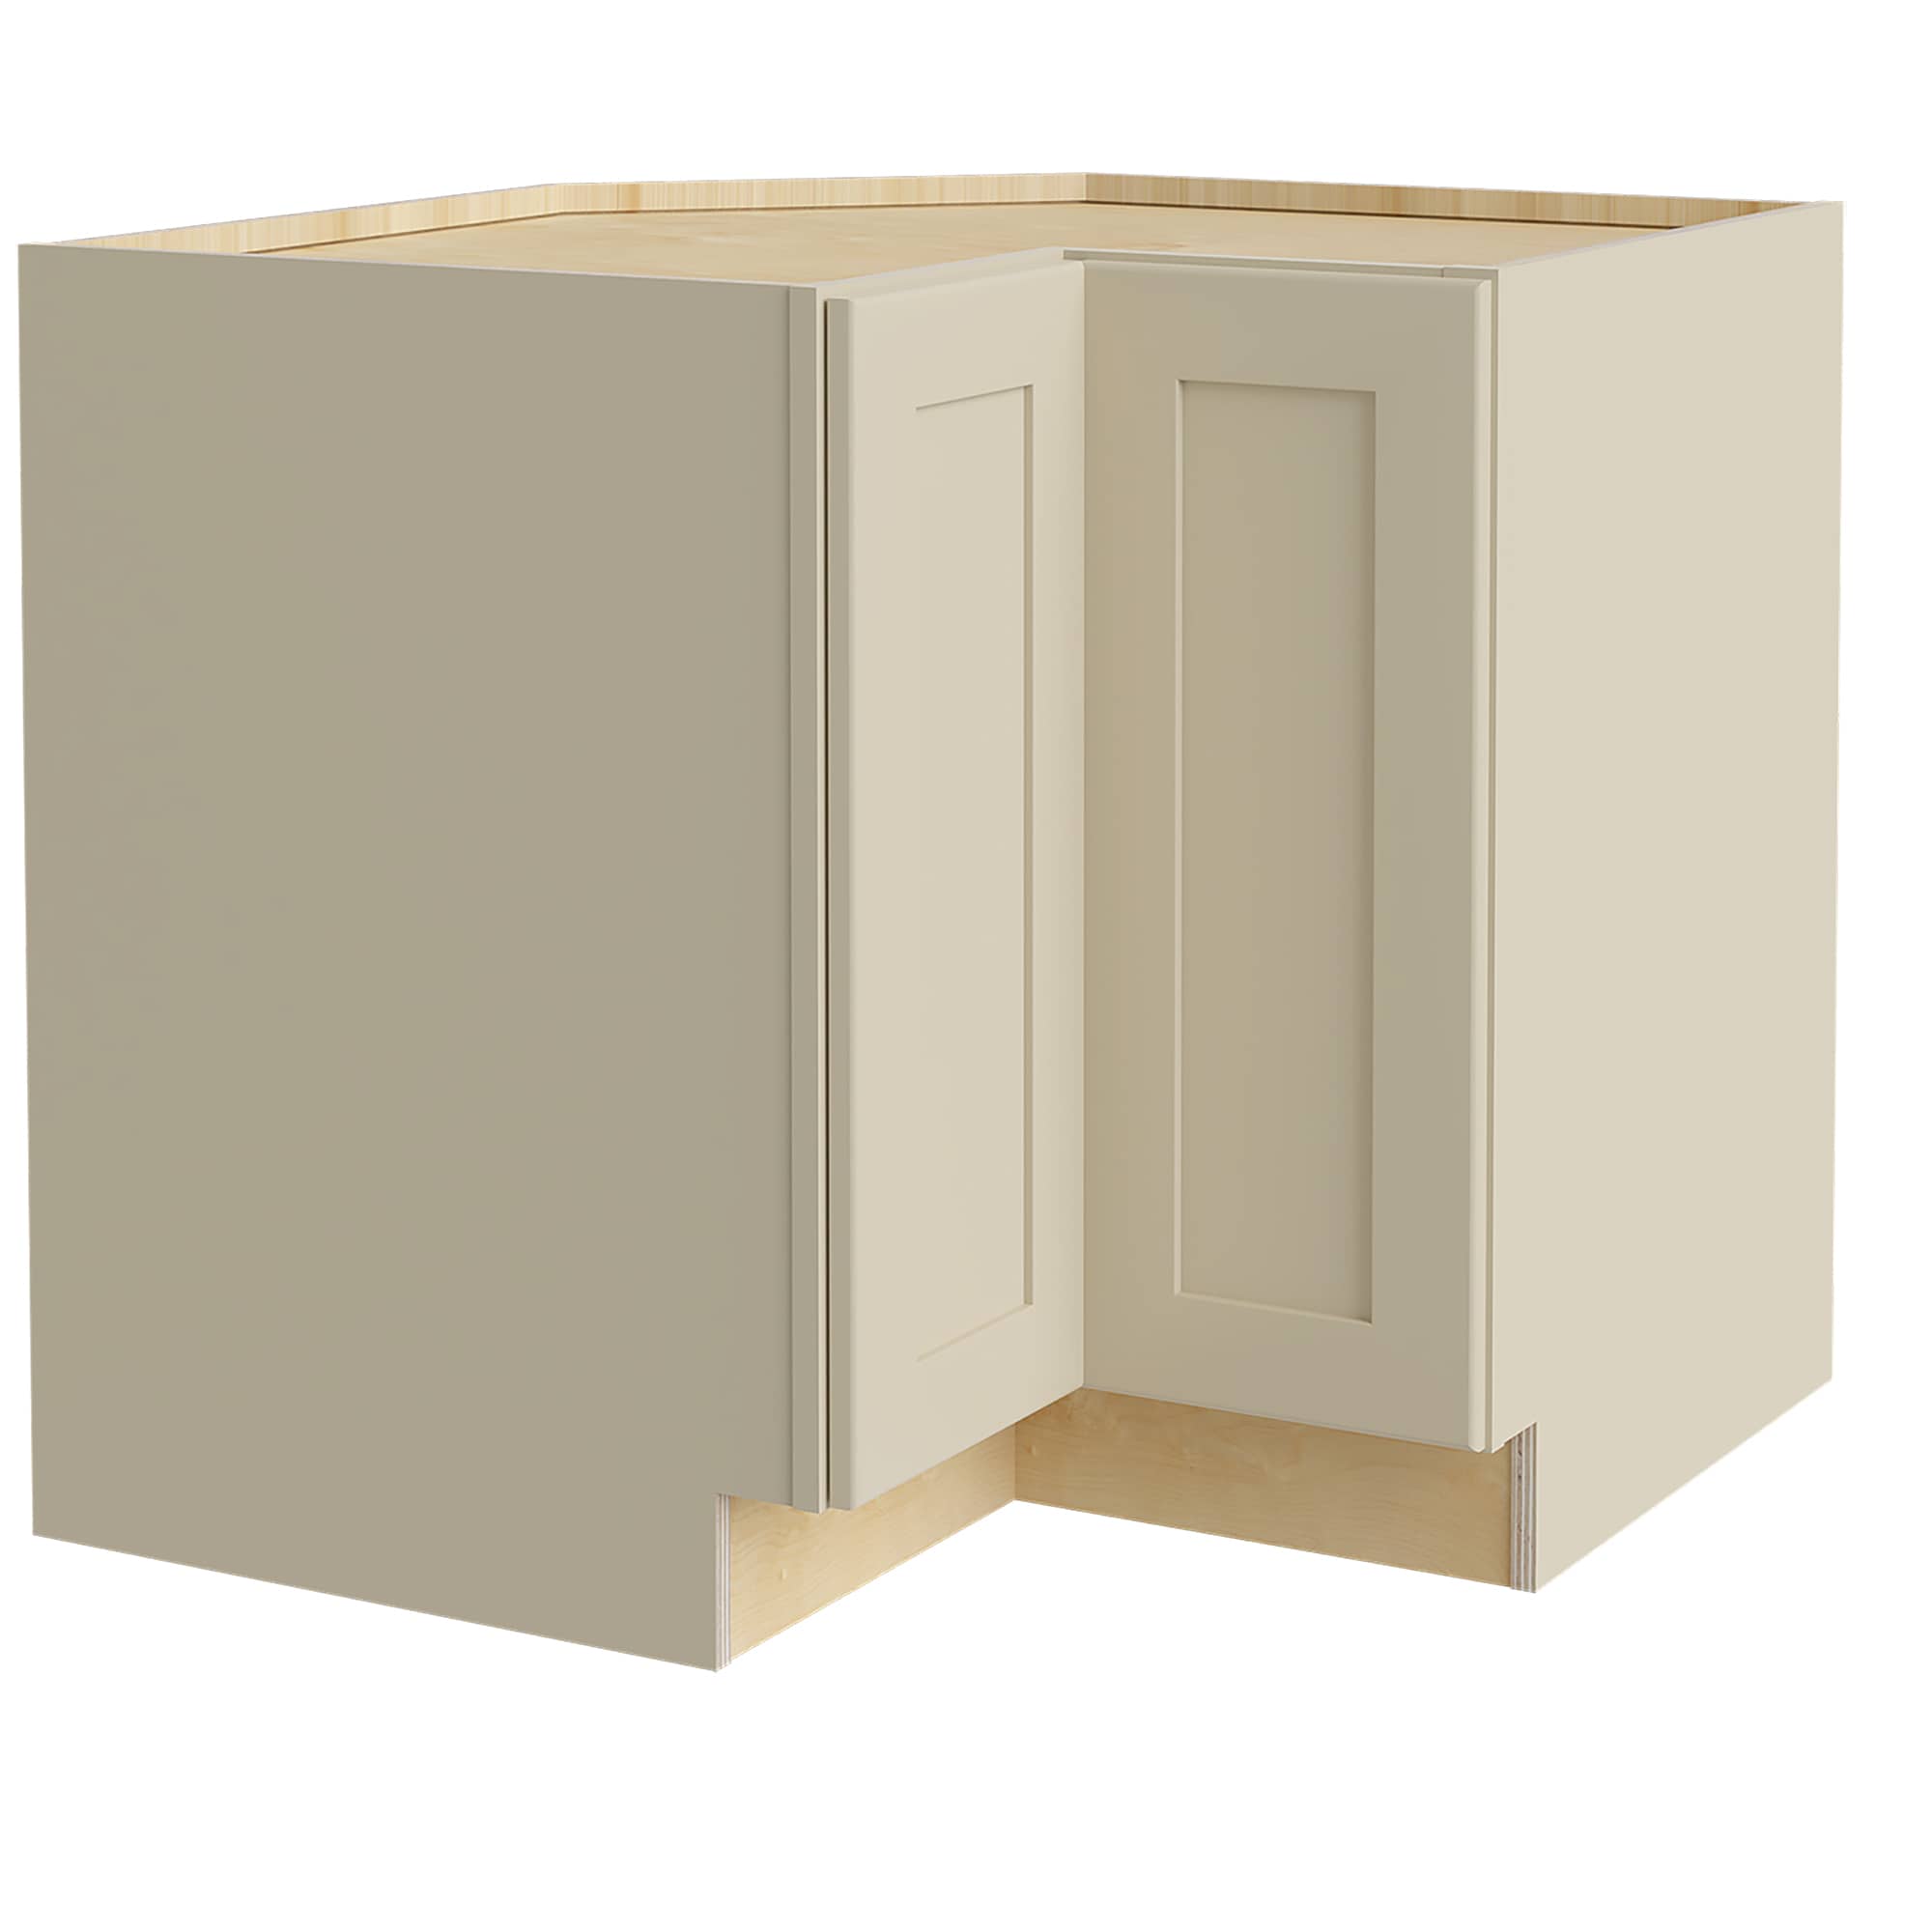 Luxxe Cabinetry 36-in W x 34.5-in H x 24-in D Norfolk Blended Cream Painted Corner Base Fully Assembled Semi-custom Cabinet in Off-White | EZR36R-NBC